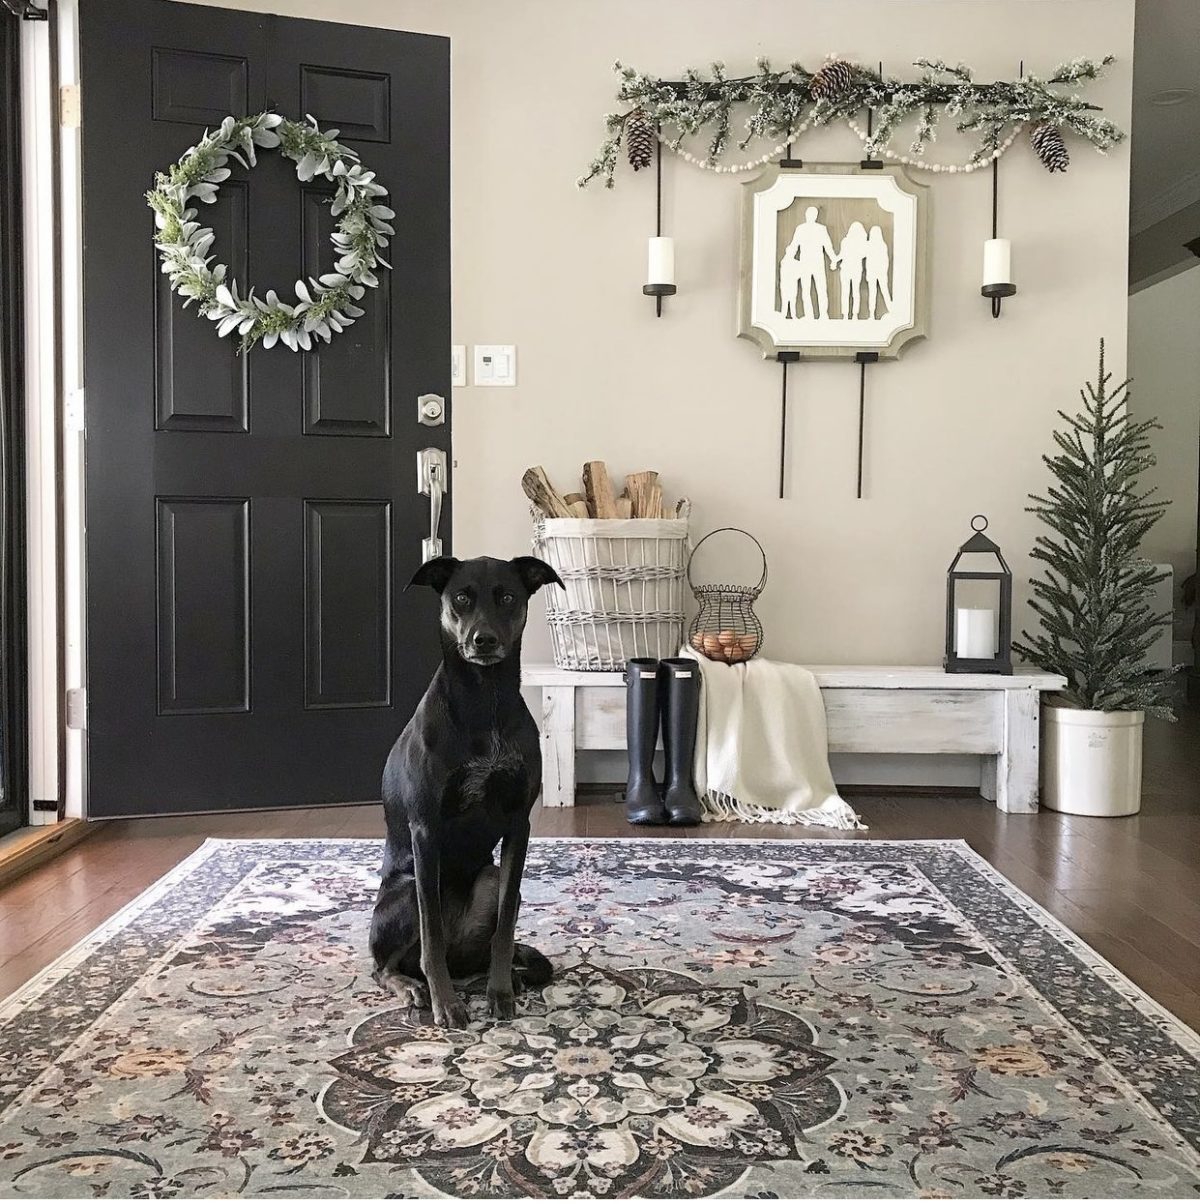 Foyer with front door open, a washable rug on the floor, and a dog sitting on it.